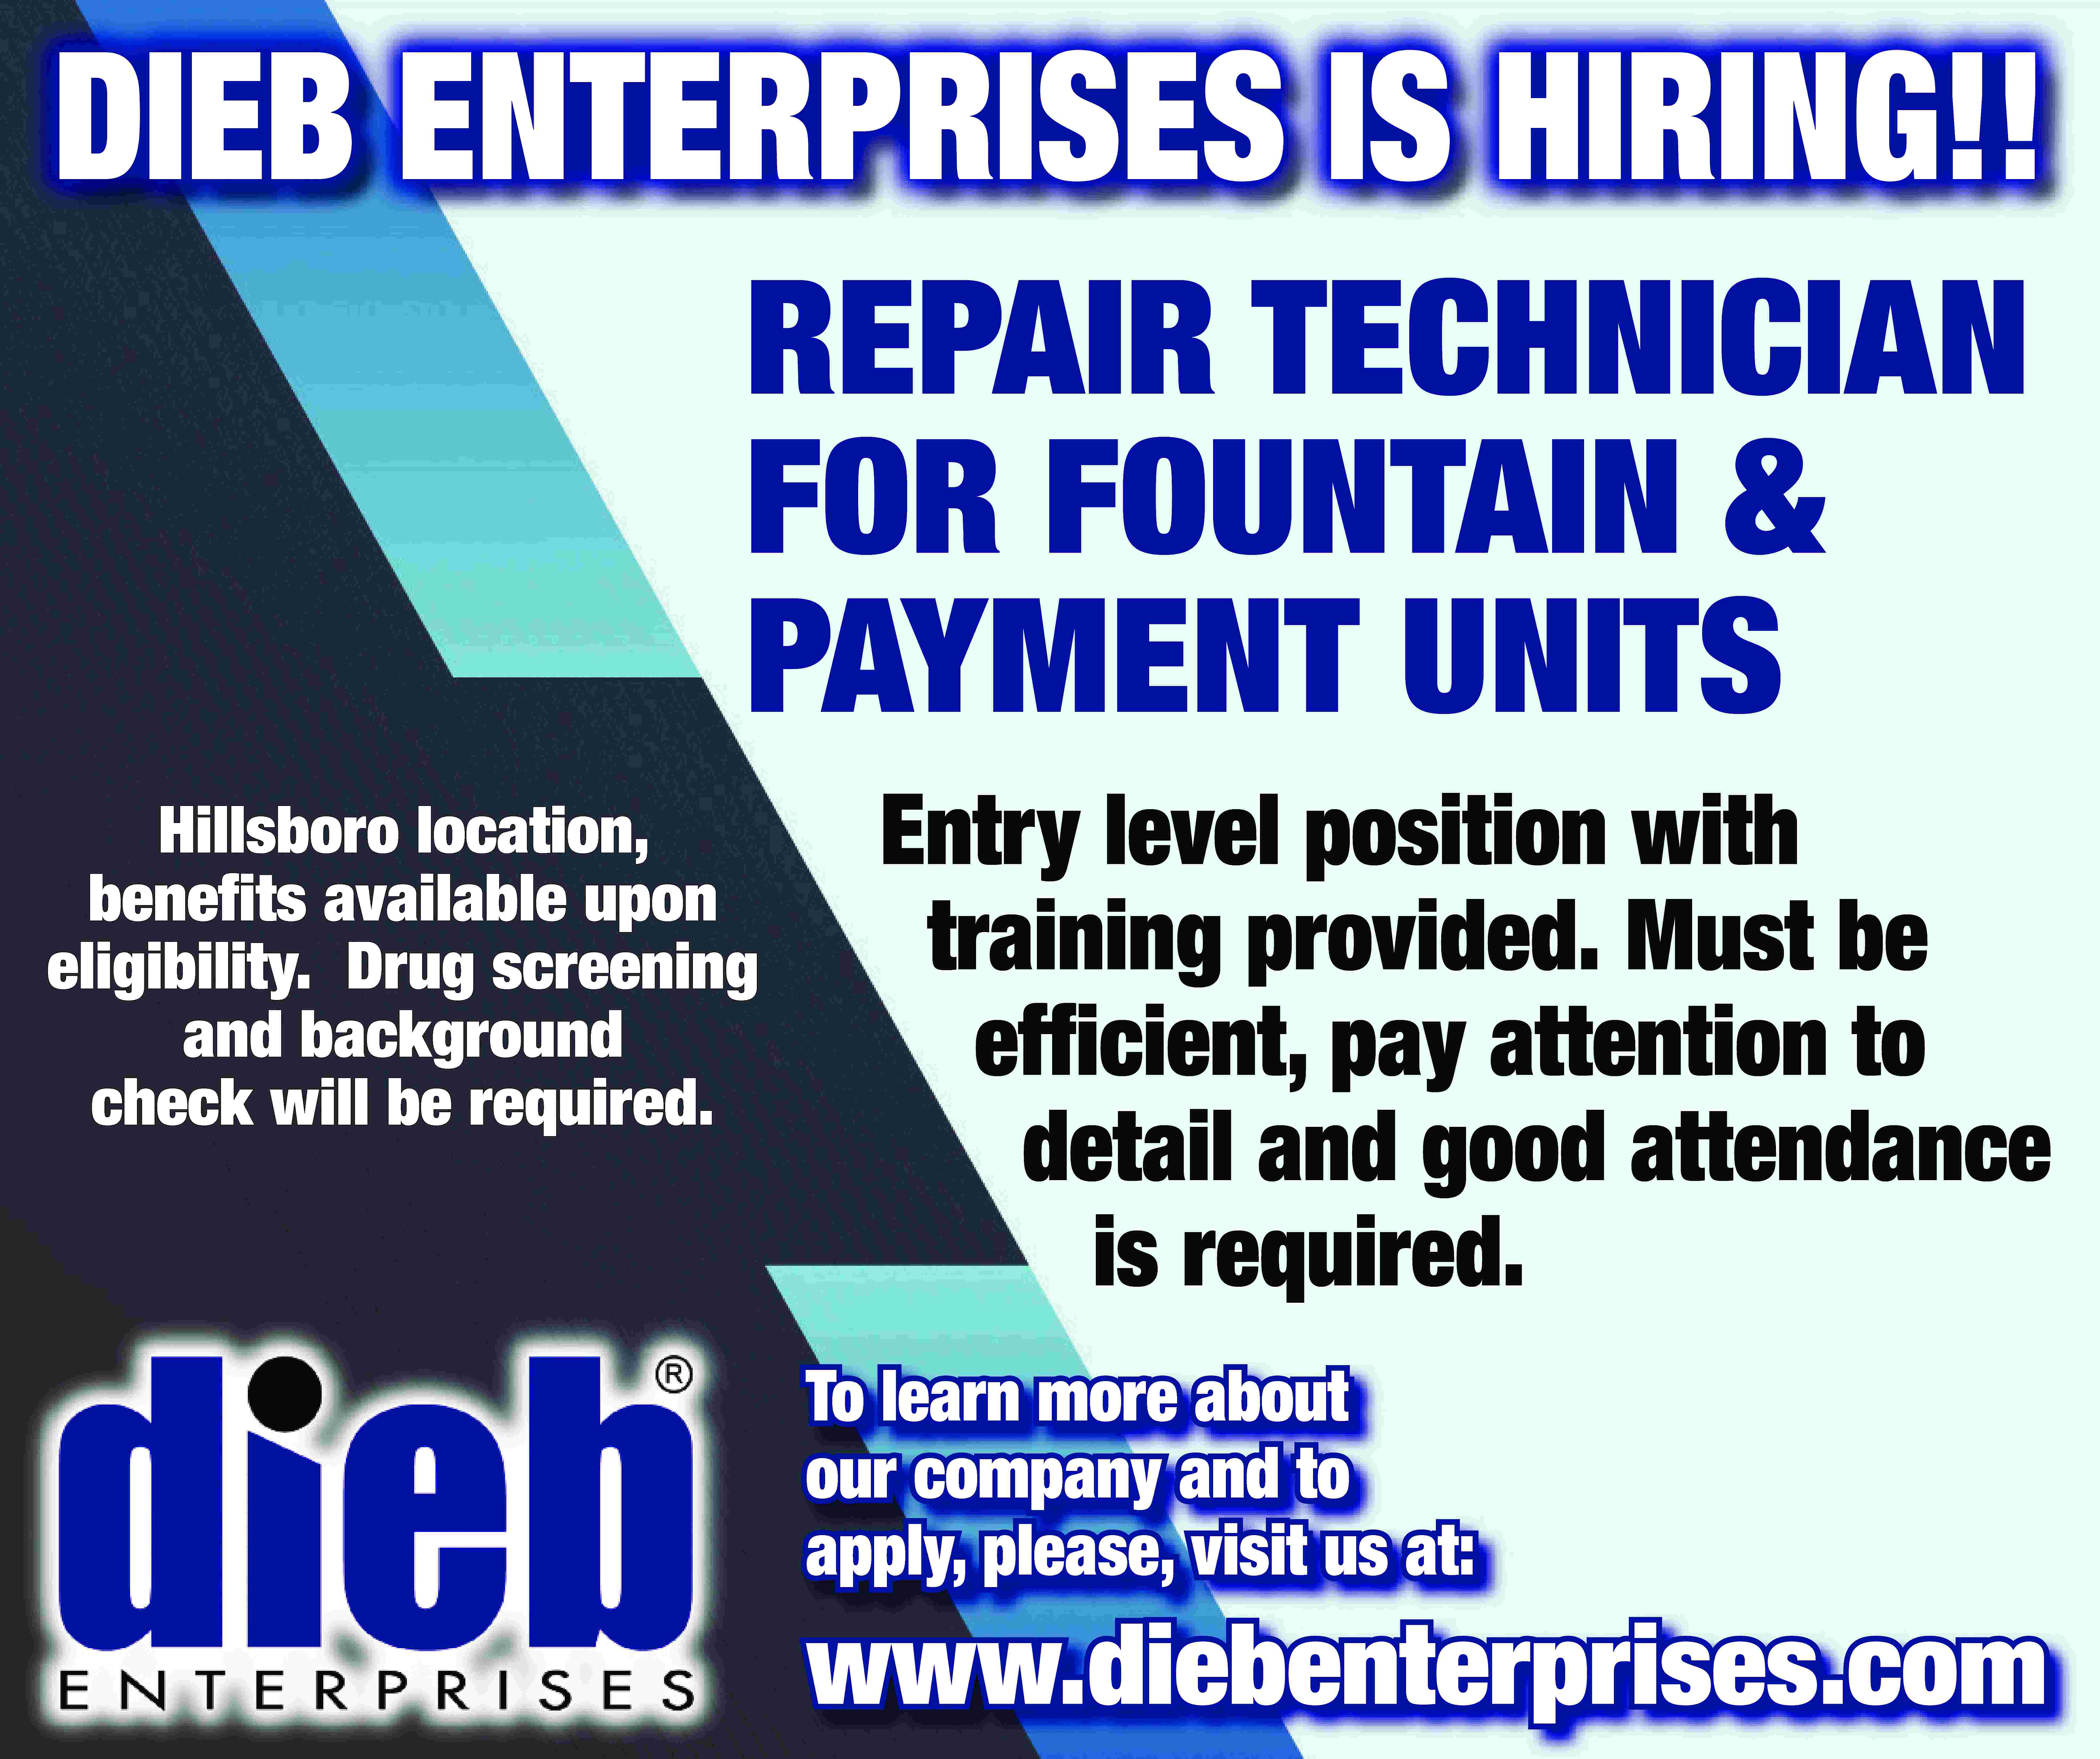 DIEB ENTERPRISES IS HIRING!! REPAIR  DIEB ENTERPRISES IS HIRING!! REPAIR TECHNICIAN FOR FOUNTAIN & PAYMENT UNITS Hillsboro location, benefits available upon eligibility. Drug screening and background check will be required. Entry level position with training provided. Must be efficient, pay attention to detail and good attendance is required. To learn more about our company and to apply, please, visit us at: www.diebenterprises.com